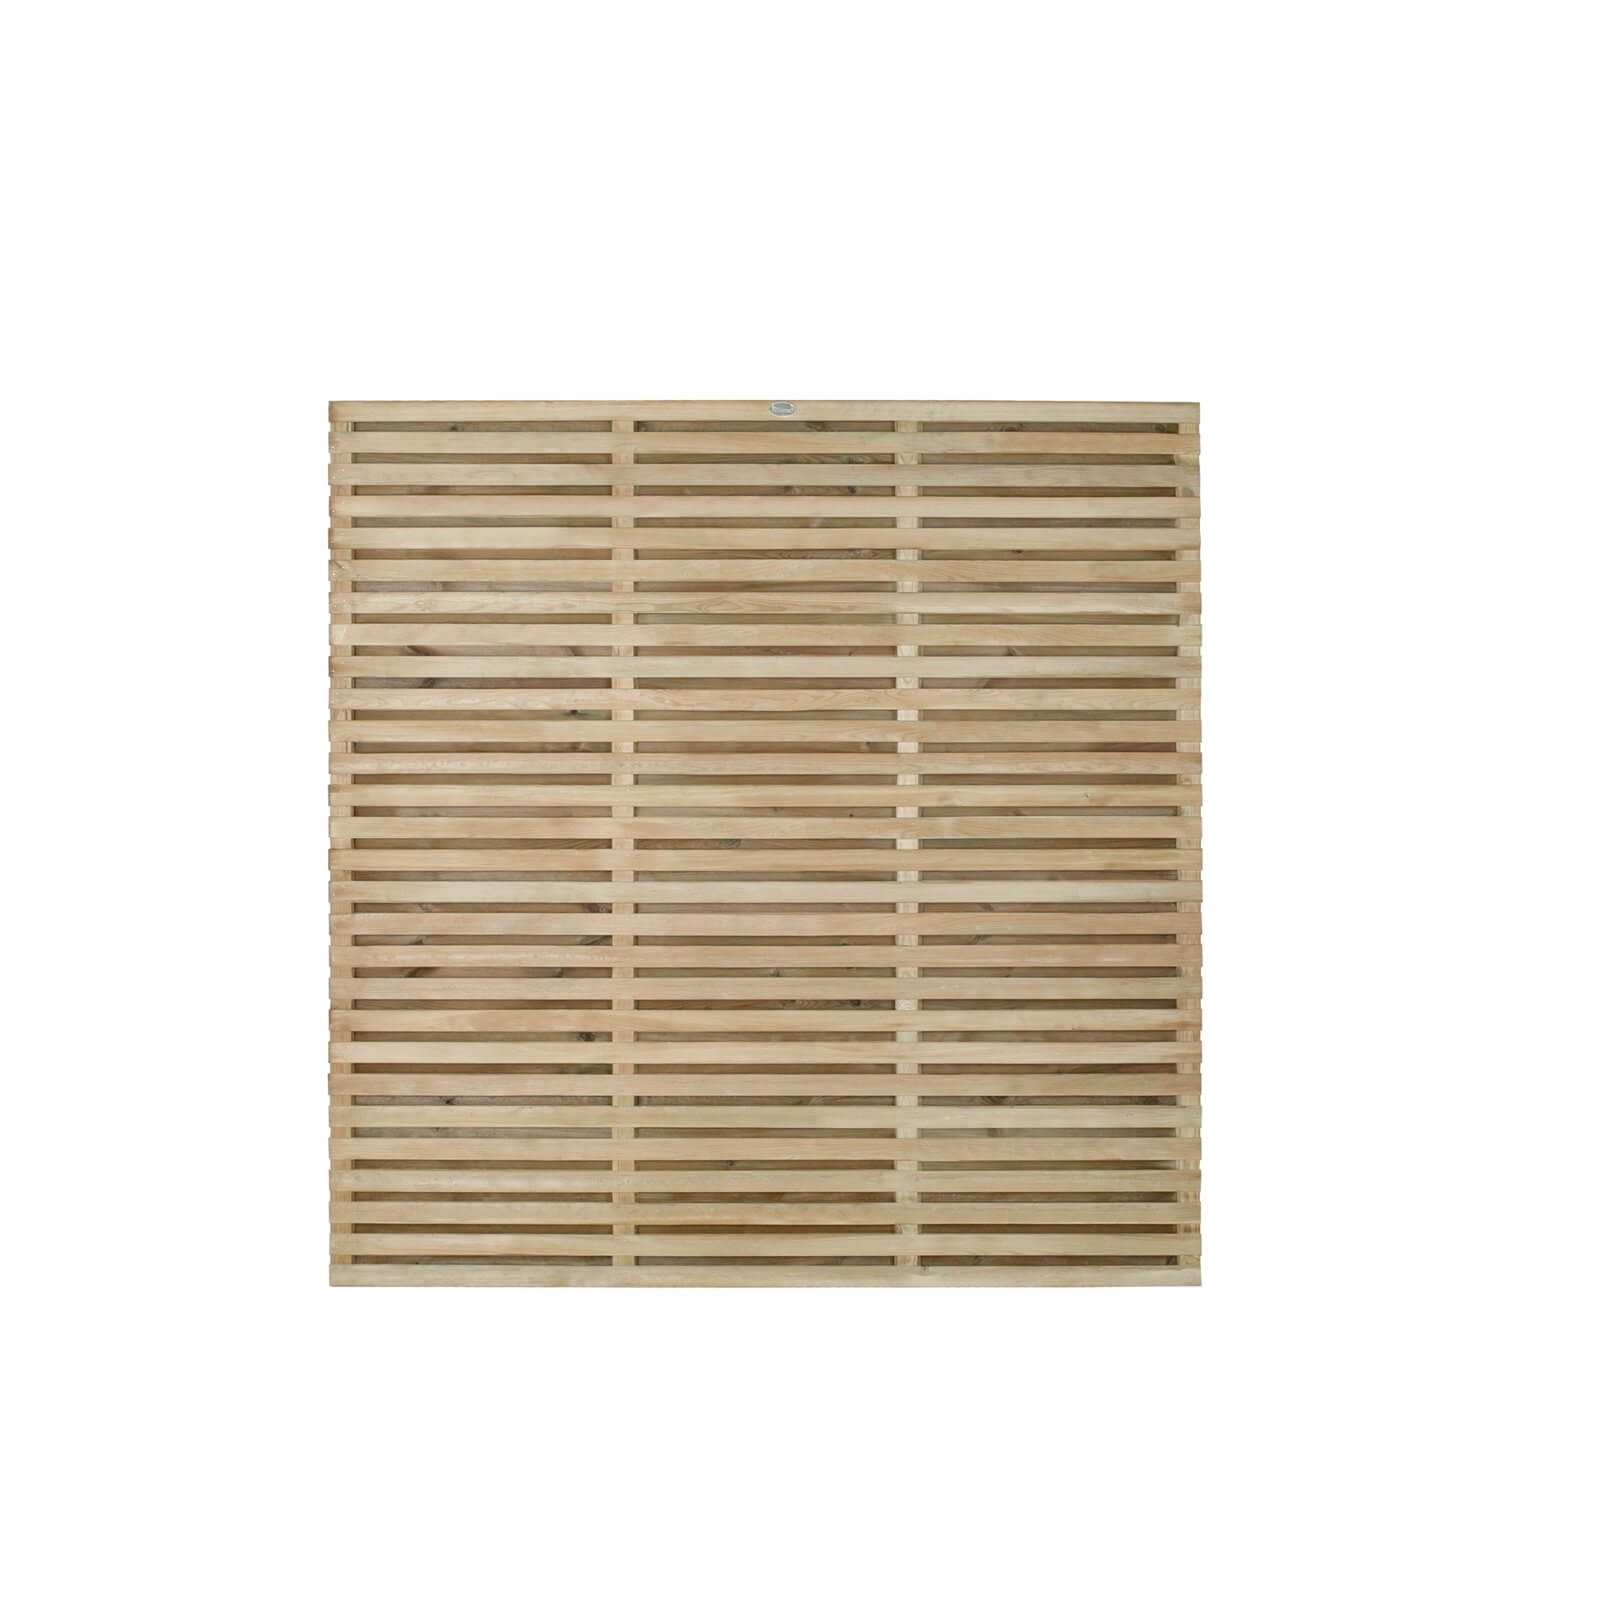 Forest Double Forest Slatted Fence Panel - 6ft - Pack of 5